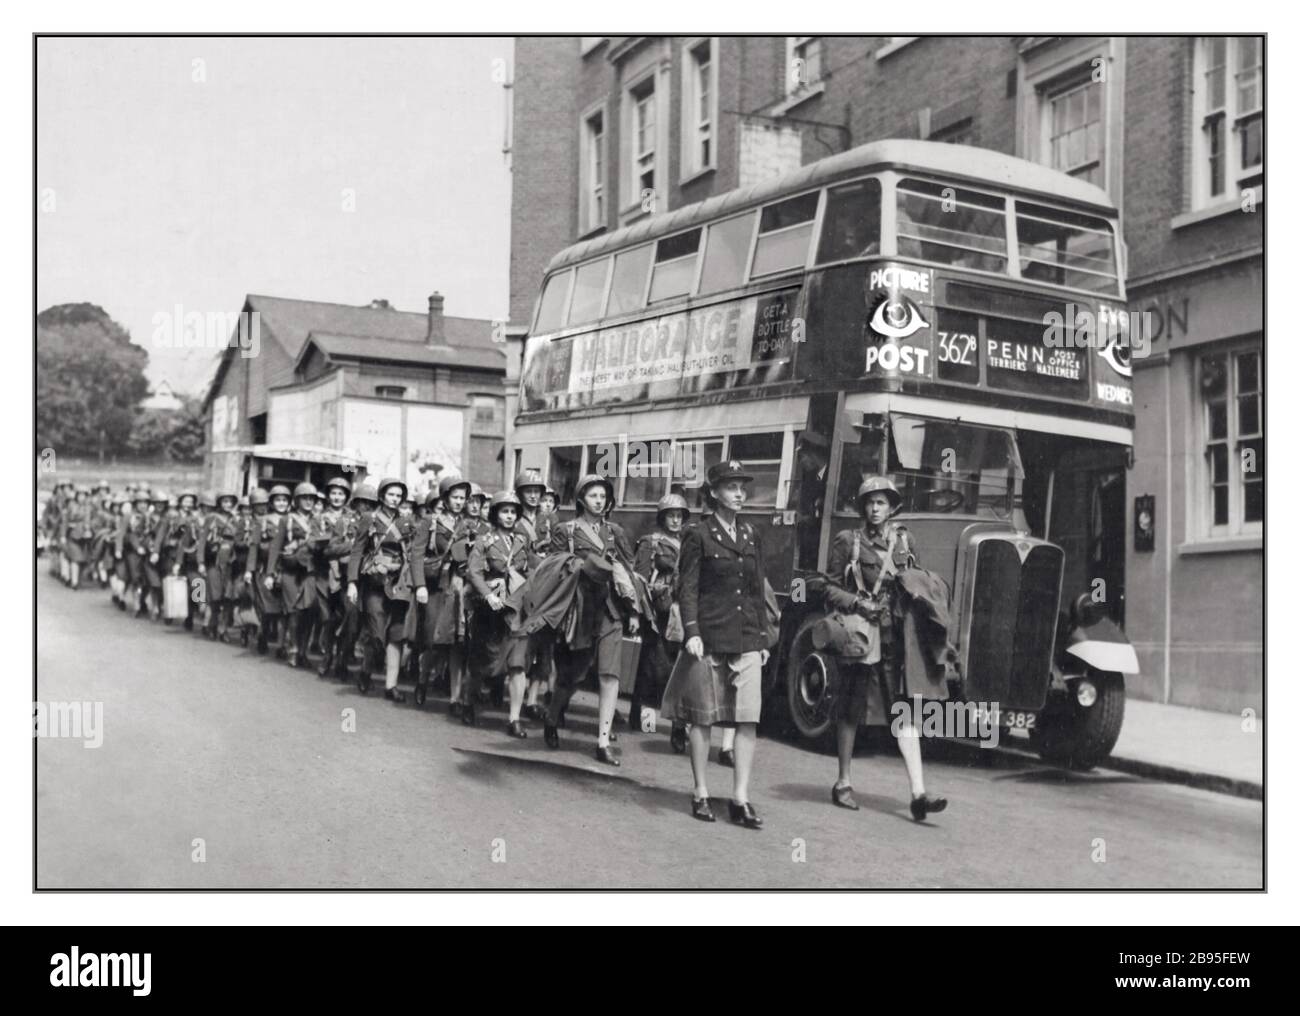 WACs WW2 USA American Eighth Air Force’s first WACs arrive in the UK July 1943. Marching in line past a typical British London Bus. WACs sent overseas were carefully selected from those with high test scores and specialized skills.The Women's Army Corps was the women's branch of the United States Army. It was created as an auxiliary unit, the Women's Army Auxiliary Corps on 15 May 1942 by Public Law 554, and converted to an active duty status in the Army of the United States as the WAC on 1 July 1943 World War II Second World War Stock Photo